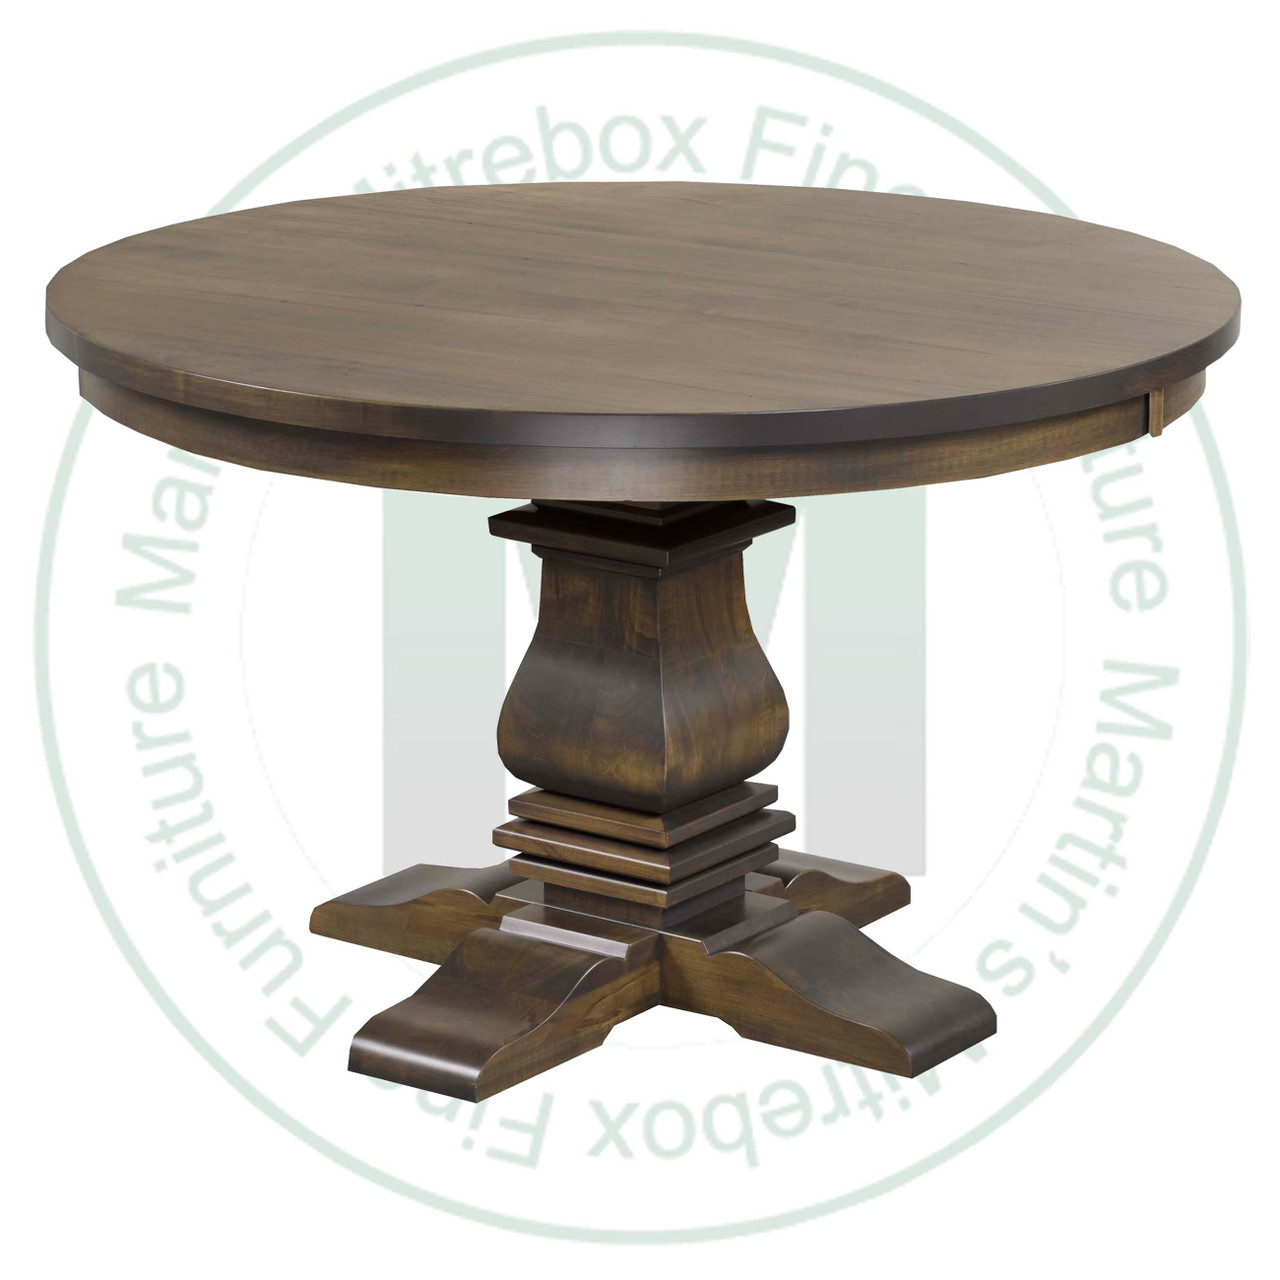 Oak Spartan Collection Single Pedestal Table 60''D x 60''W x 30''H With 1 - 12'' Leaf. Table Has 1.25'' Thick Top